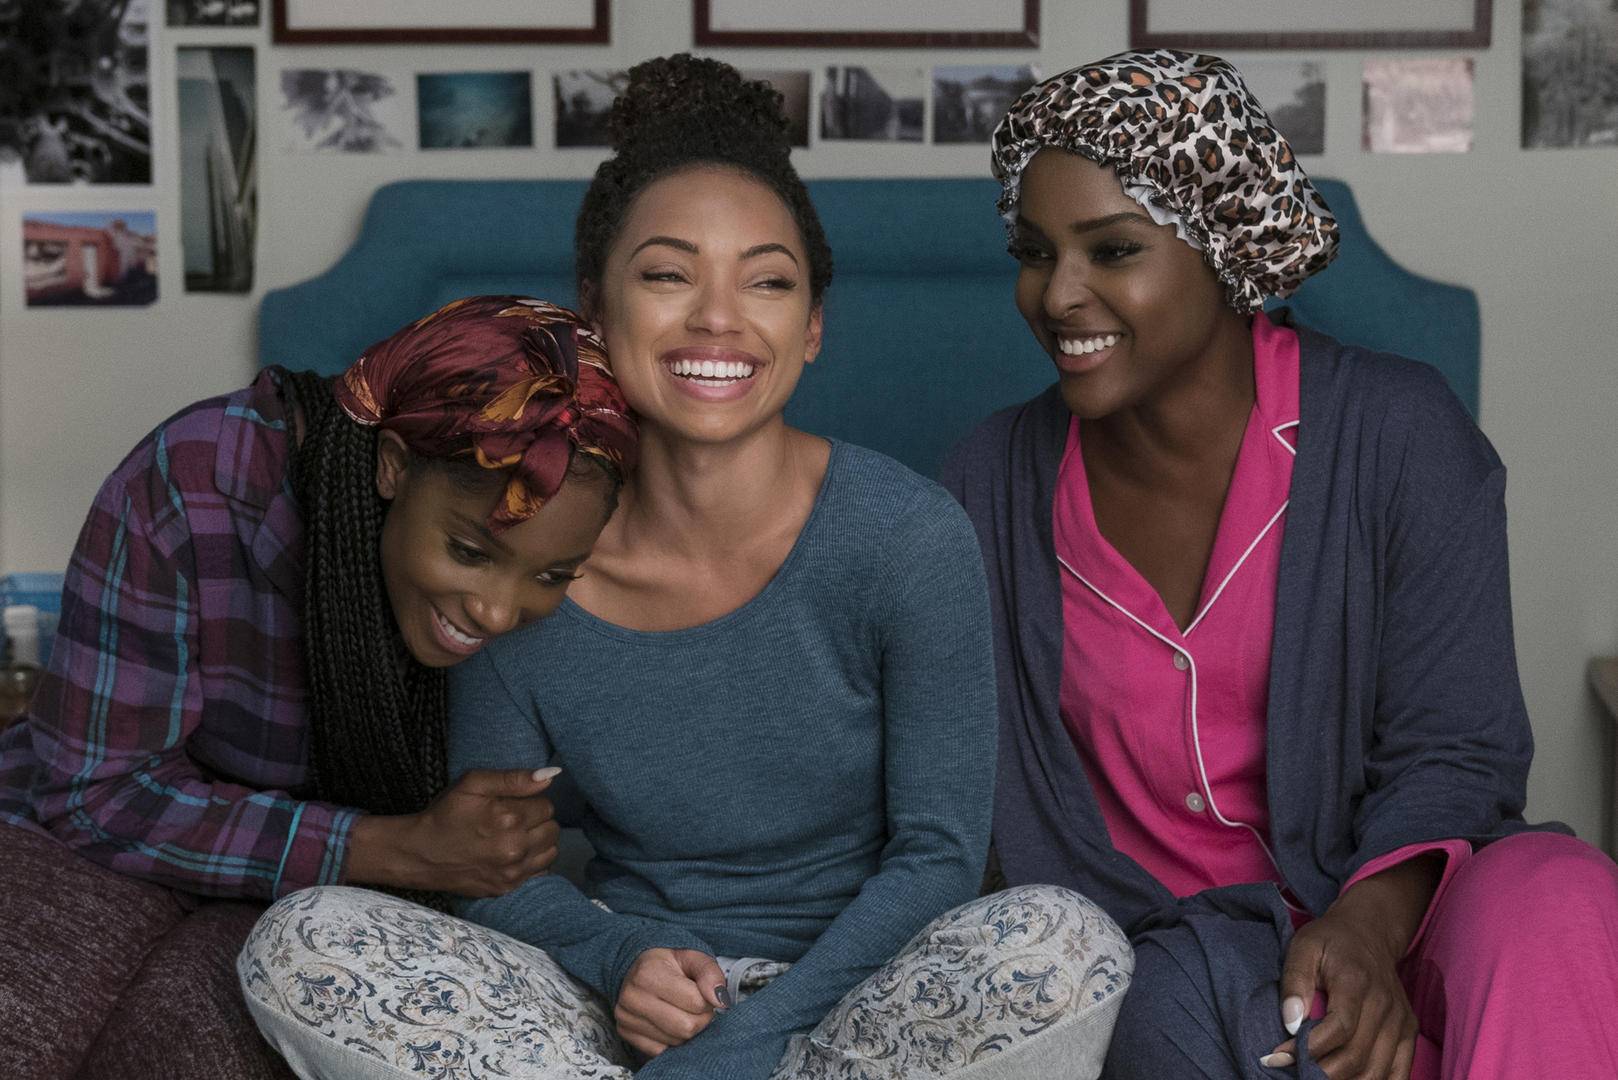 We ask the cast of "Dear White People" if the show should be named "Dear Black People."